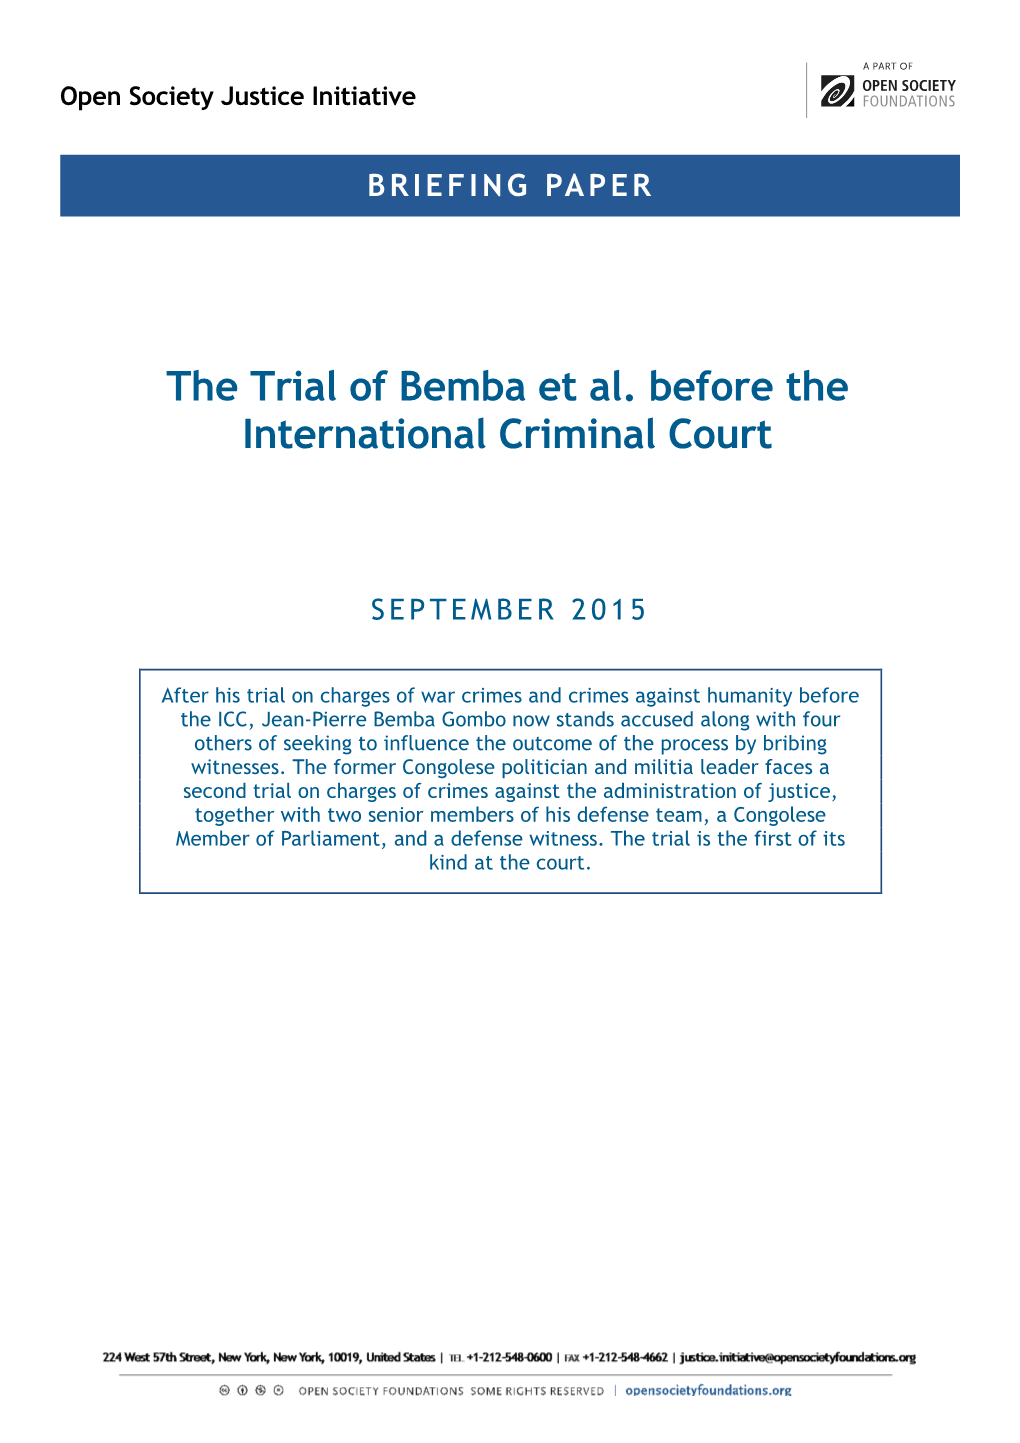 The Trial of Bemba Et Al. Before the International Criminal Court